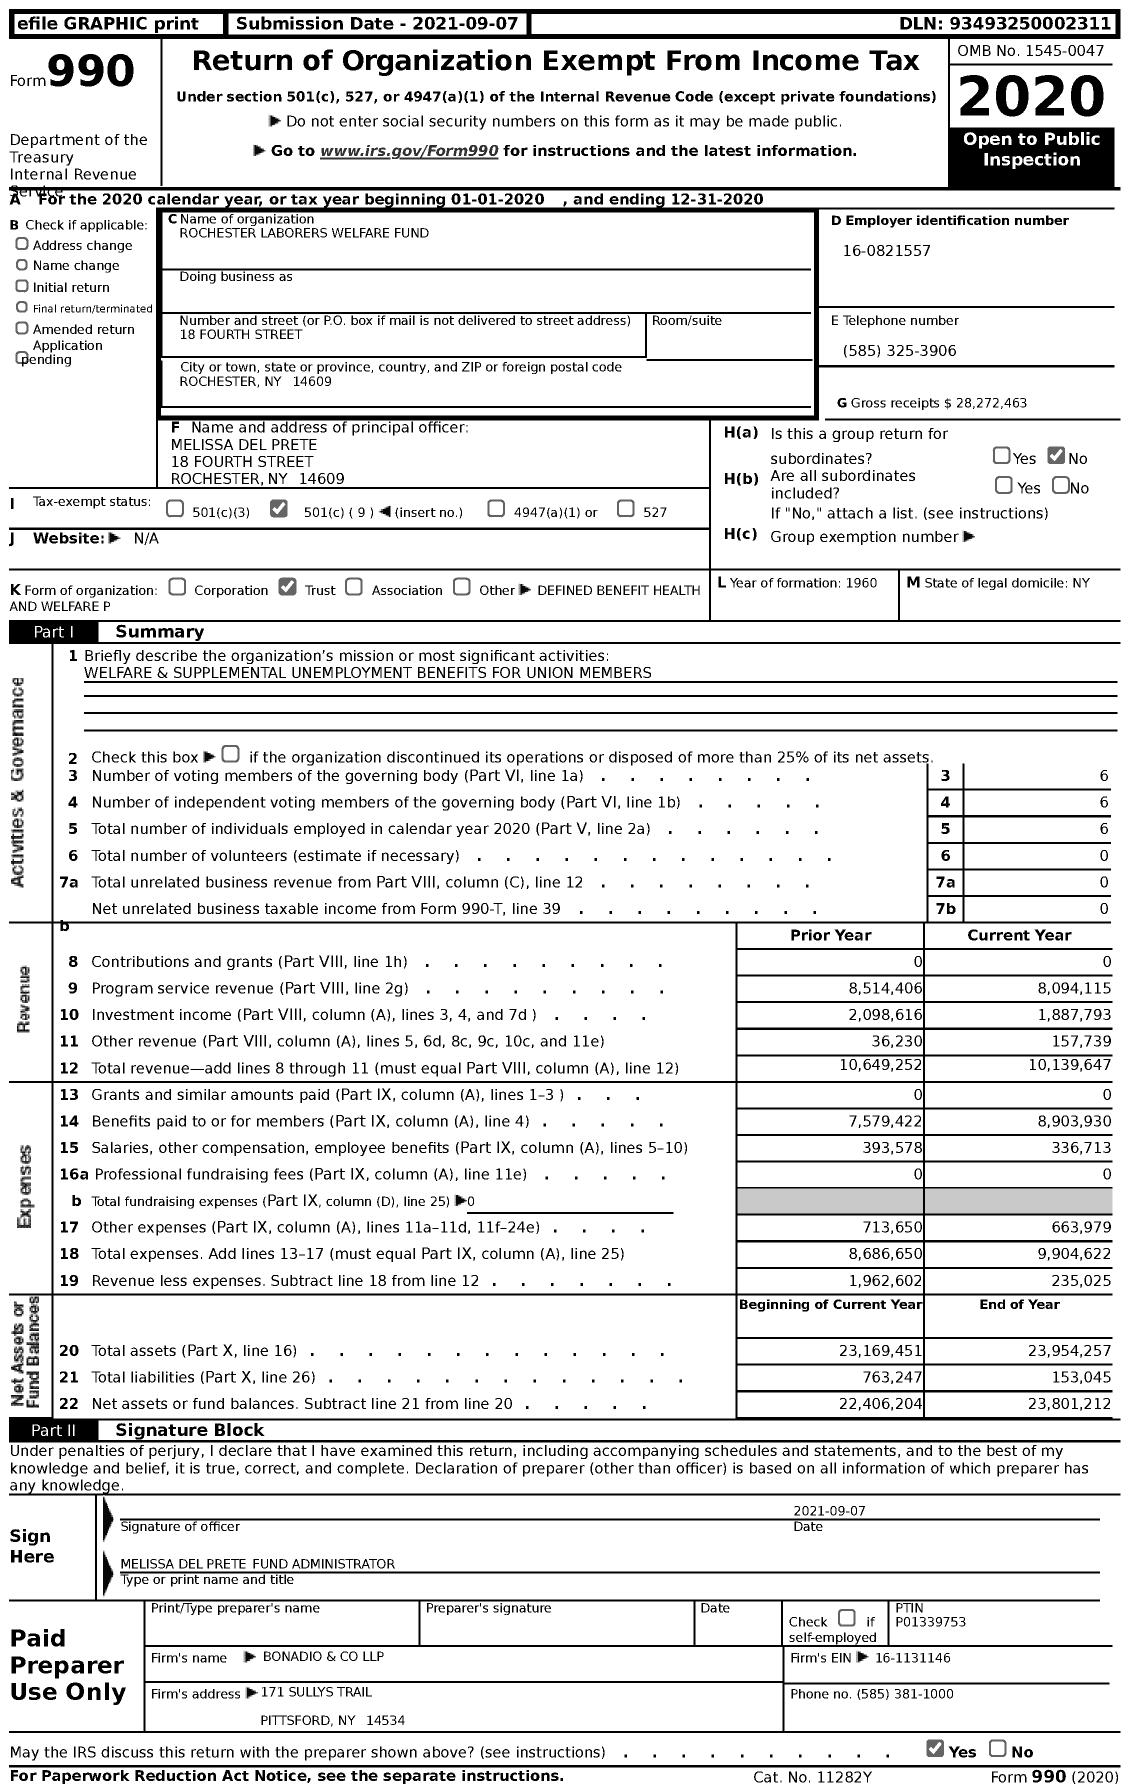 Image of first page of 2020 Form 990 for Rochester Laborers Welfare Fund